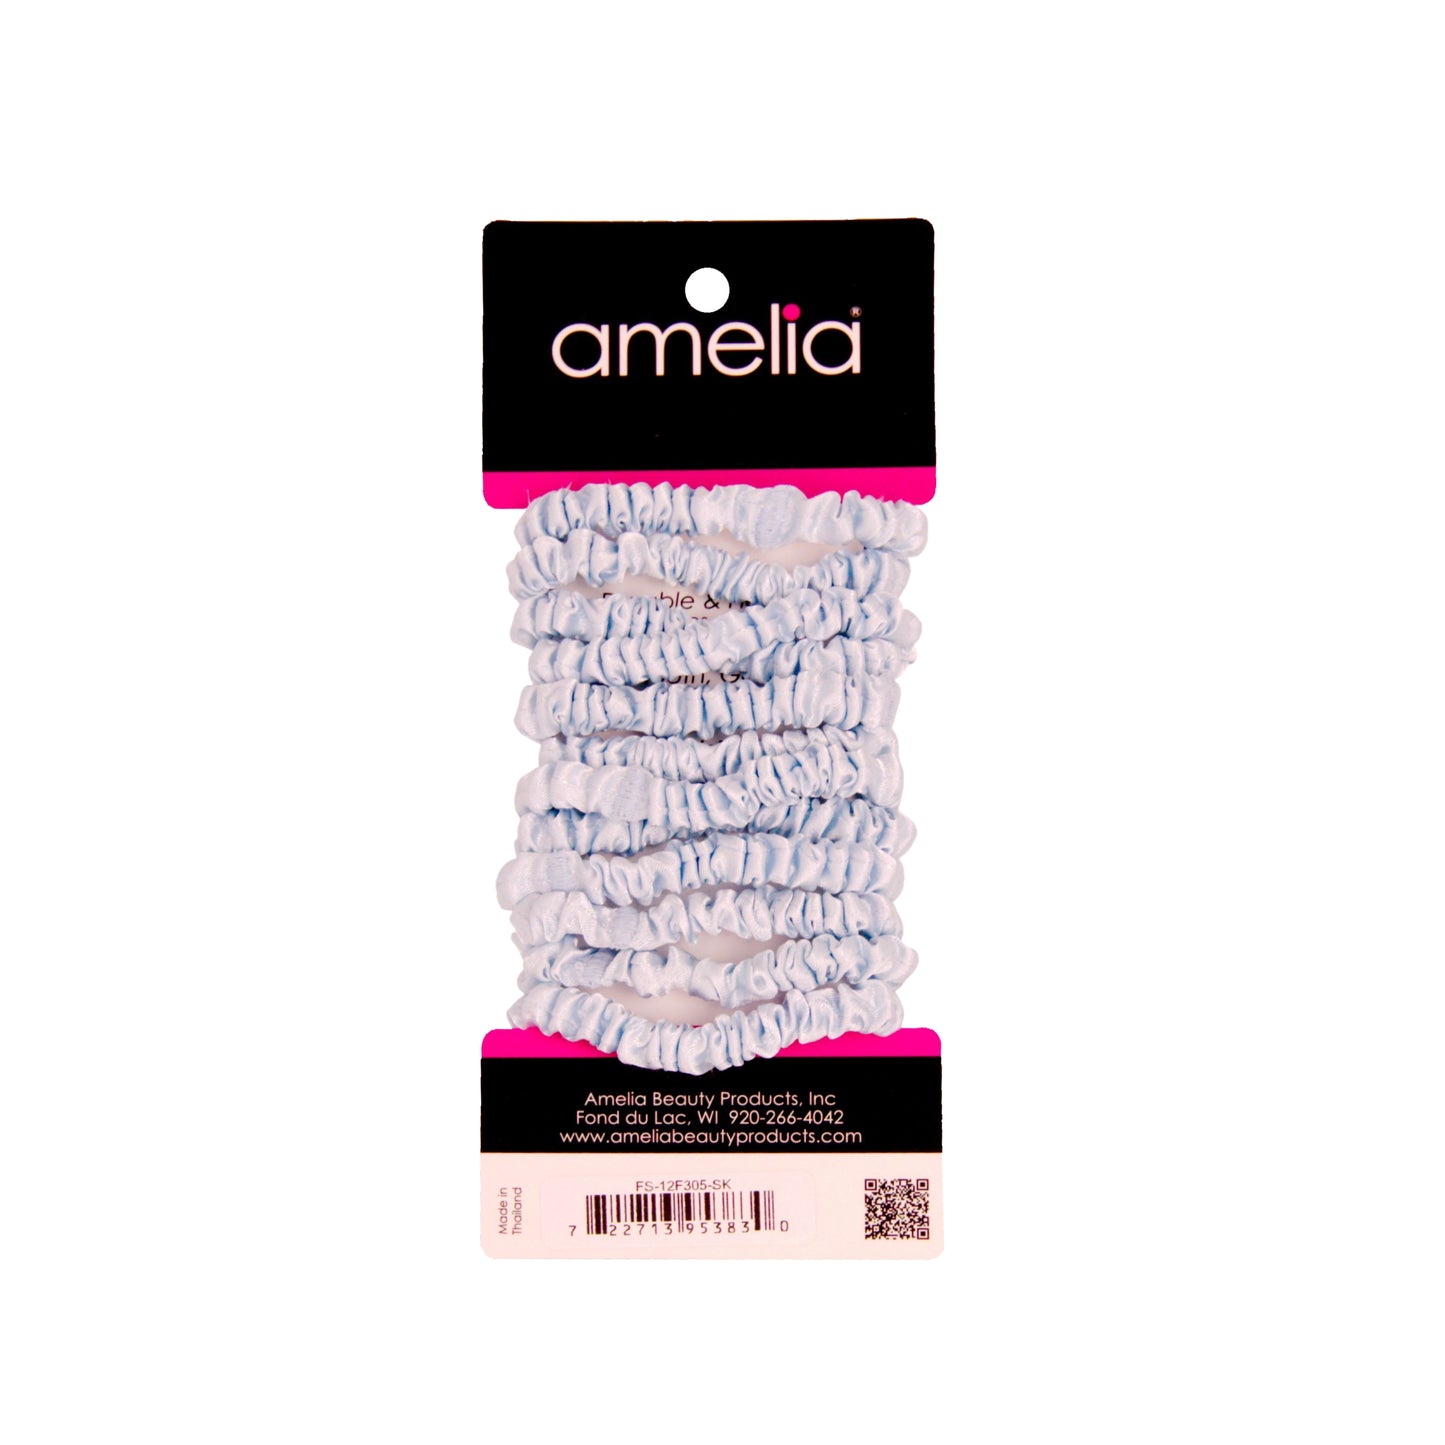 Amelia Beauty, Sky Blue Skinny Satin Scrunchies, 2in Diameter, Gentle and Strong Hold, No Snag, No Dents or Creases. 12 Pack